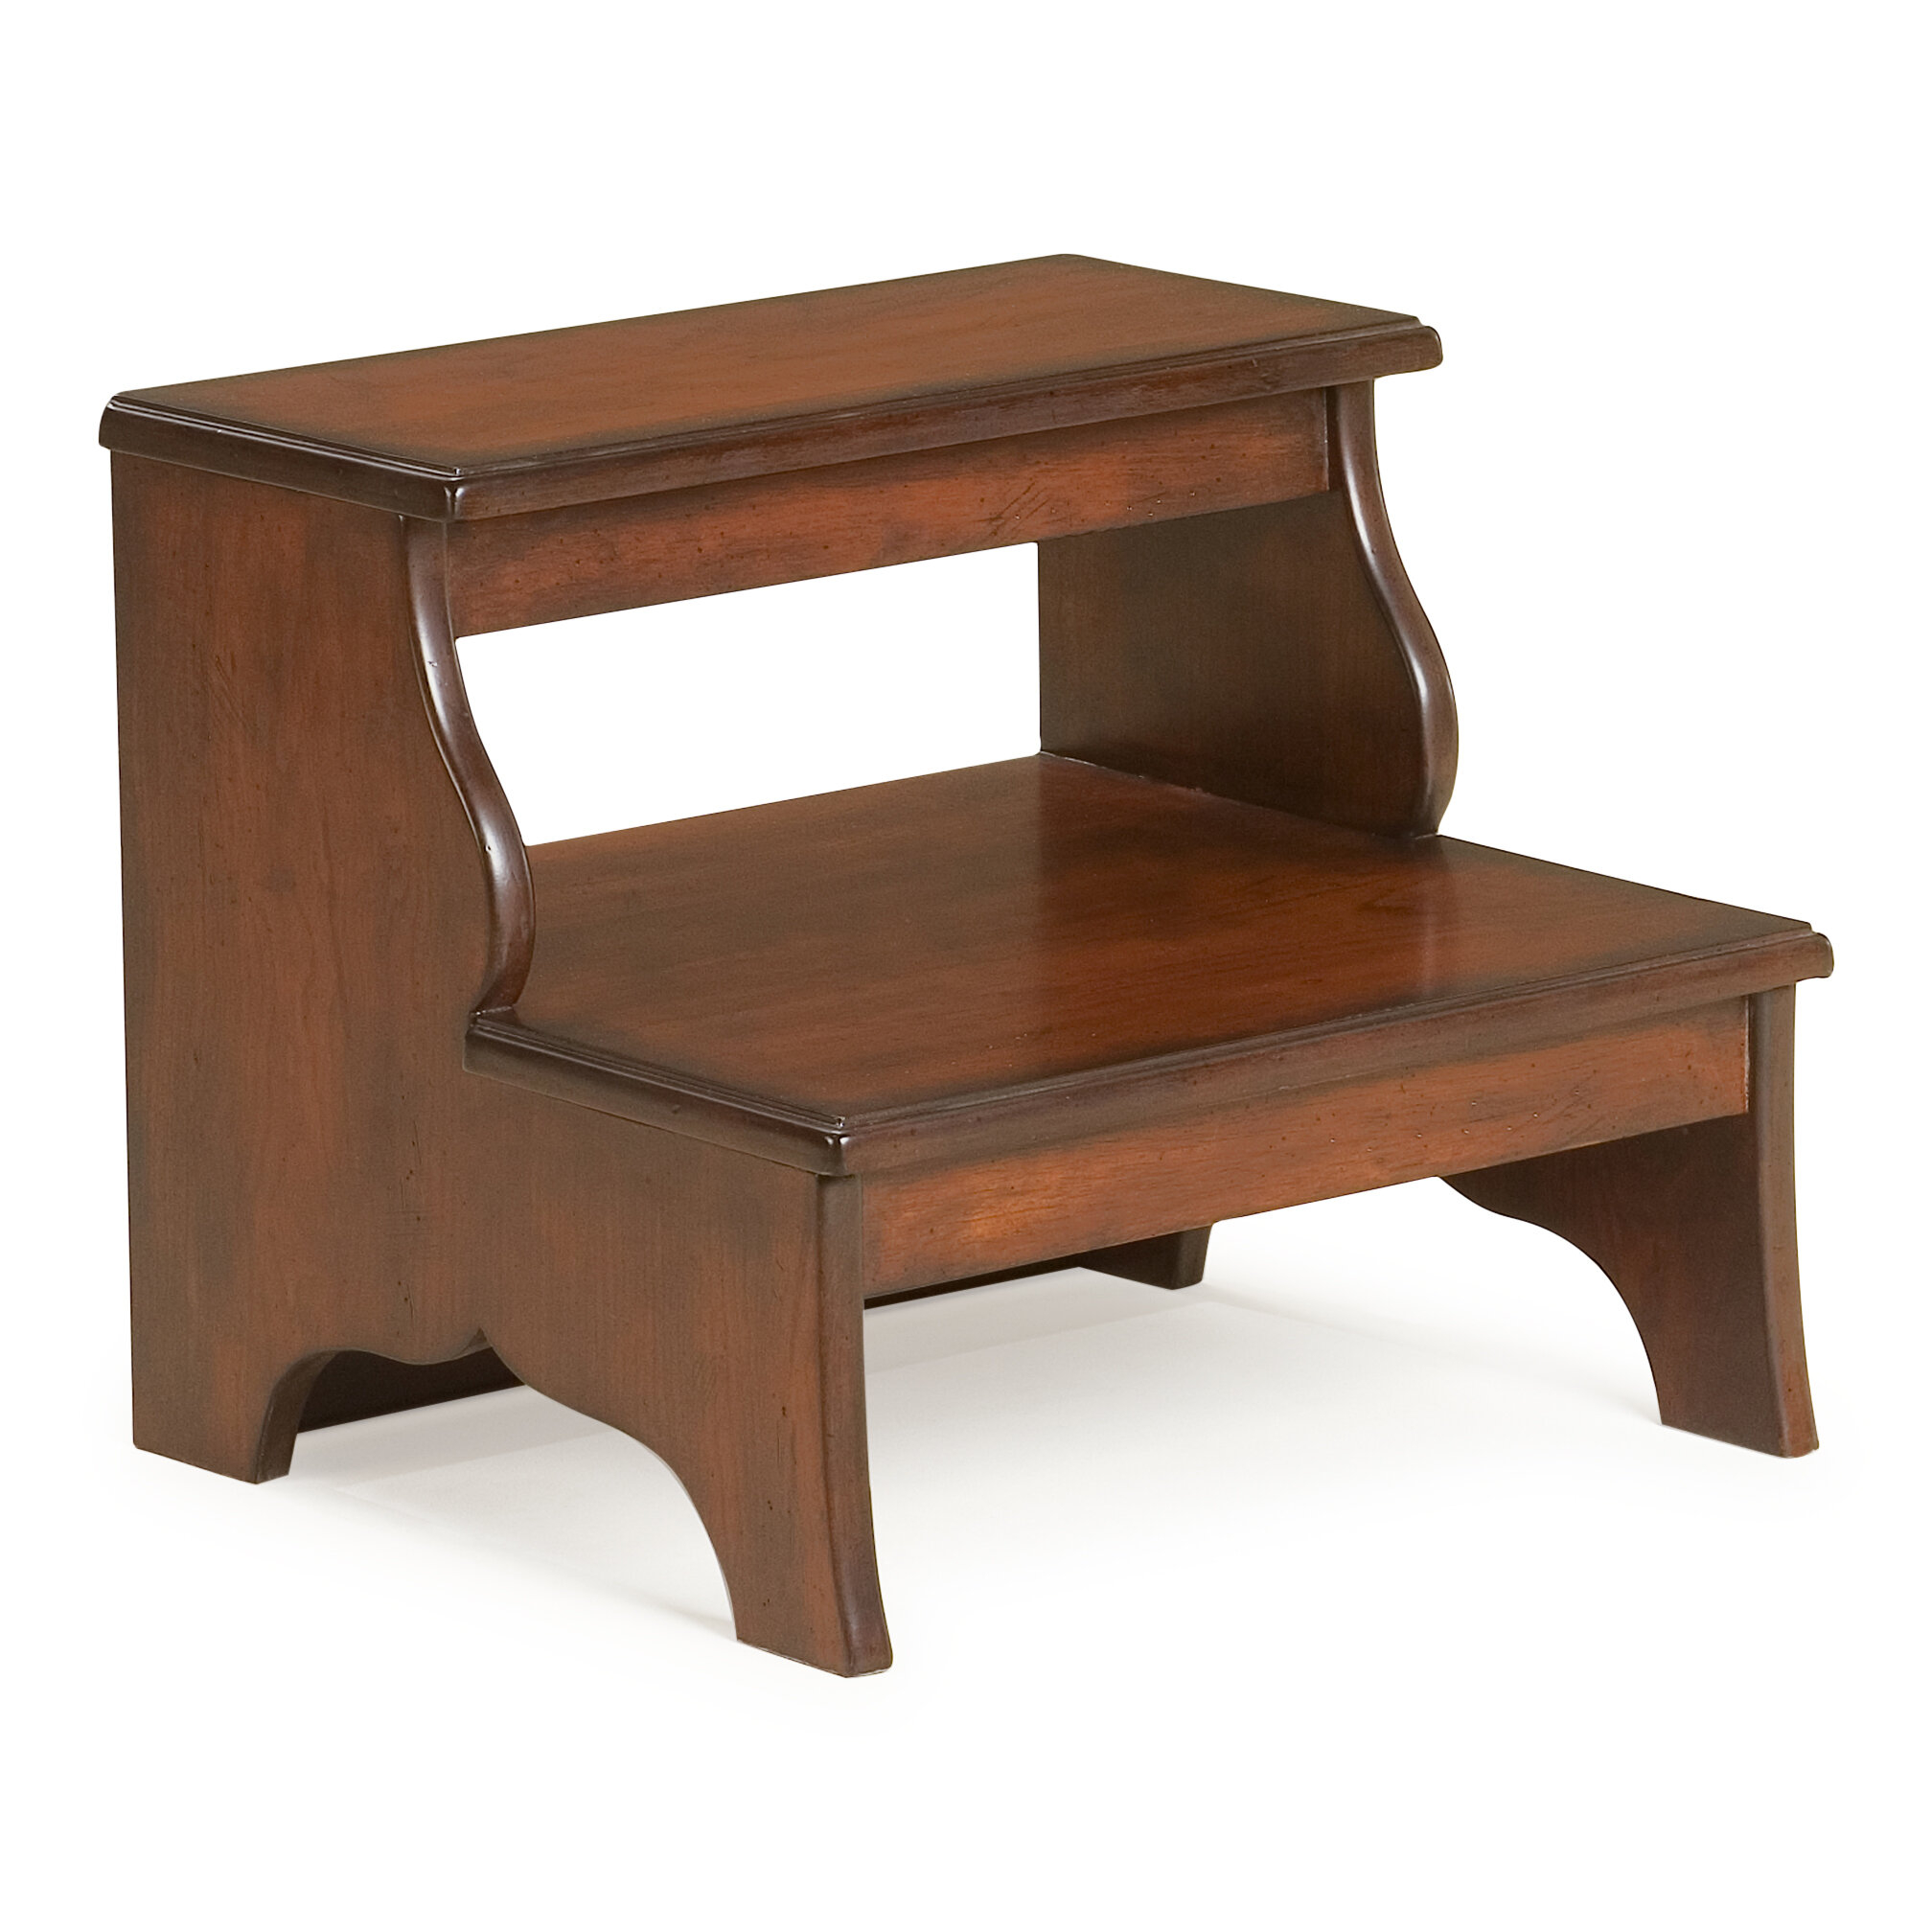 15 Inches Tall Hardwood Cherry Veneers Step Stool Ideal For Your Kitchen,  Library or Bedroom, Construction Will Live Through Years Of Use.